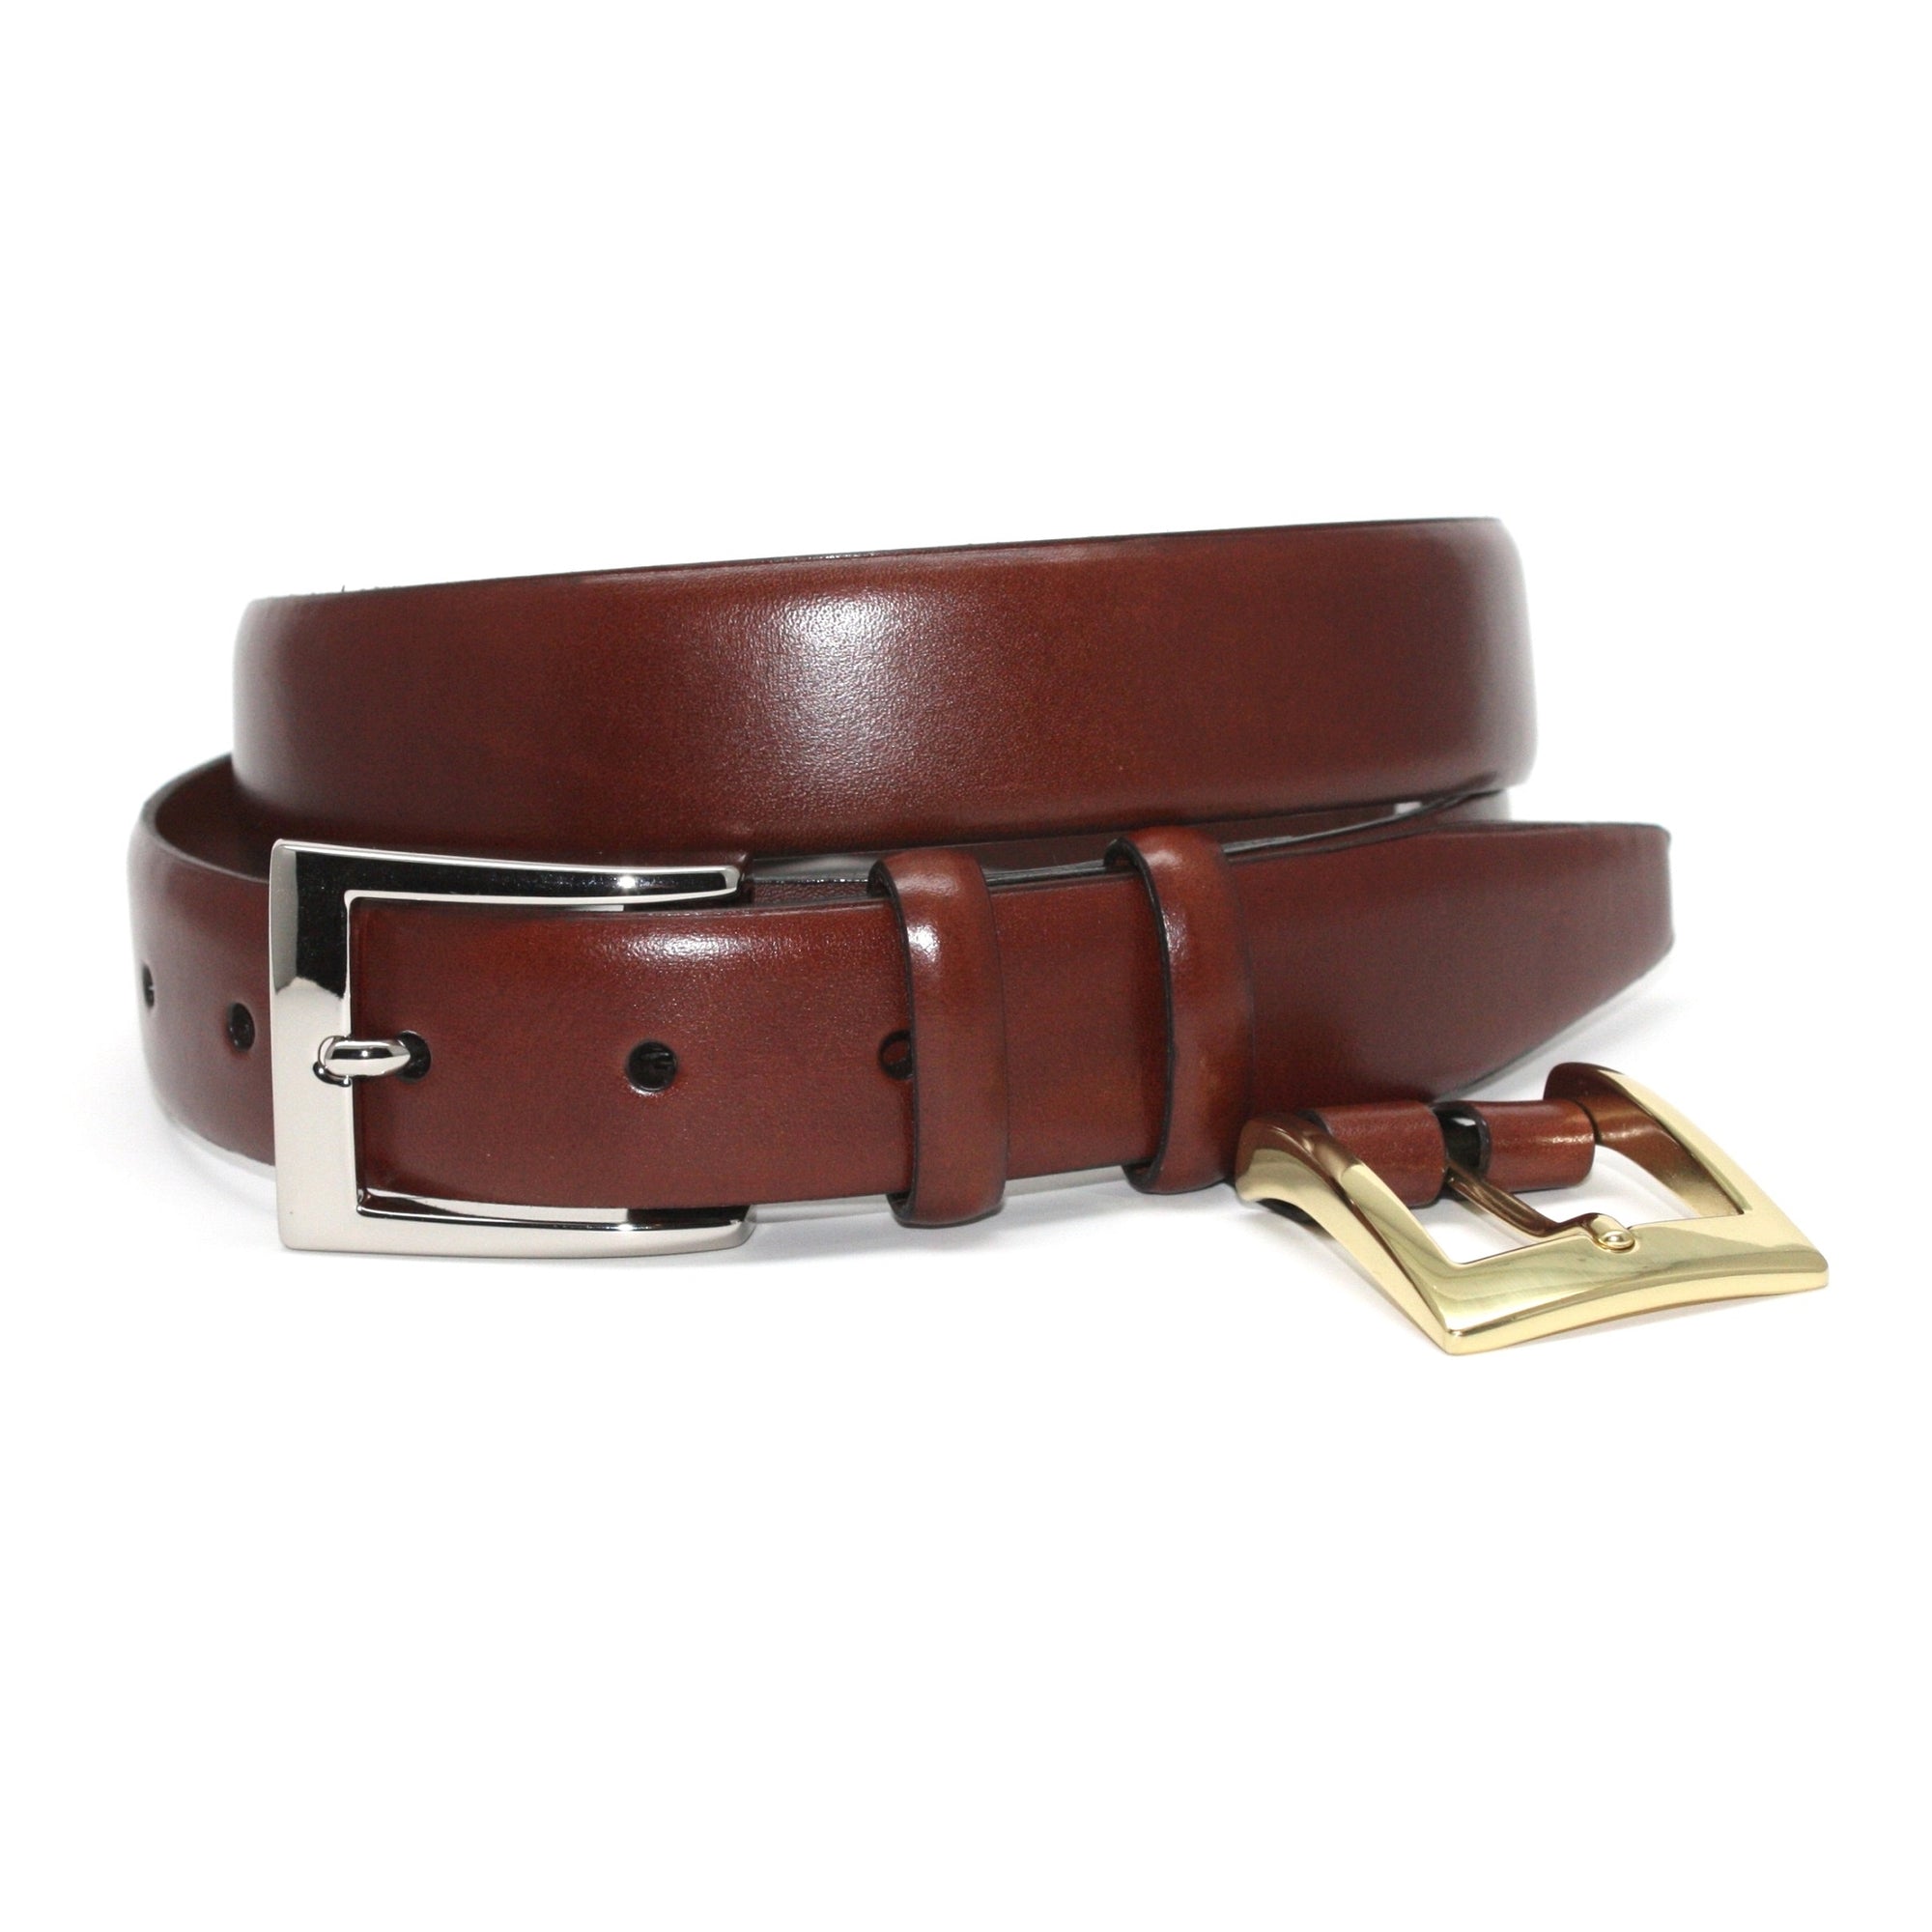 Italian Calfskin Belt with Interchangeable Buckles in Chili by Torino Leather